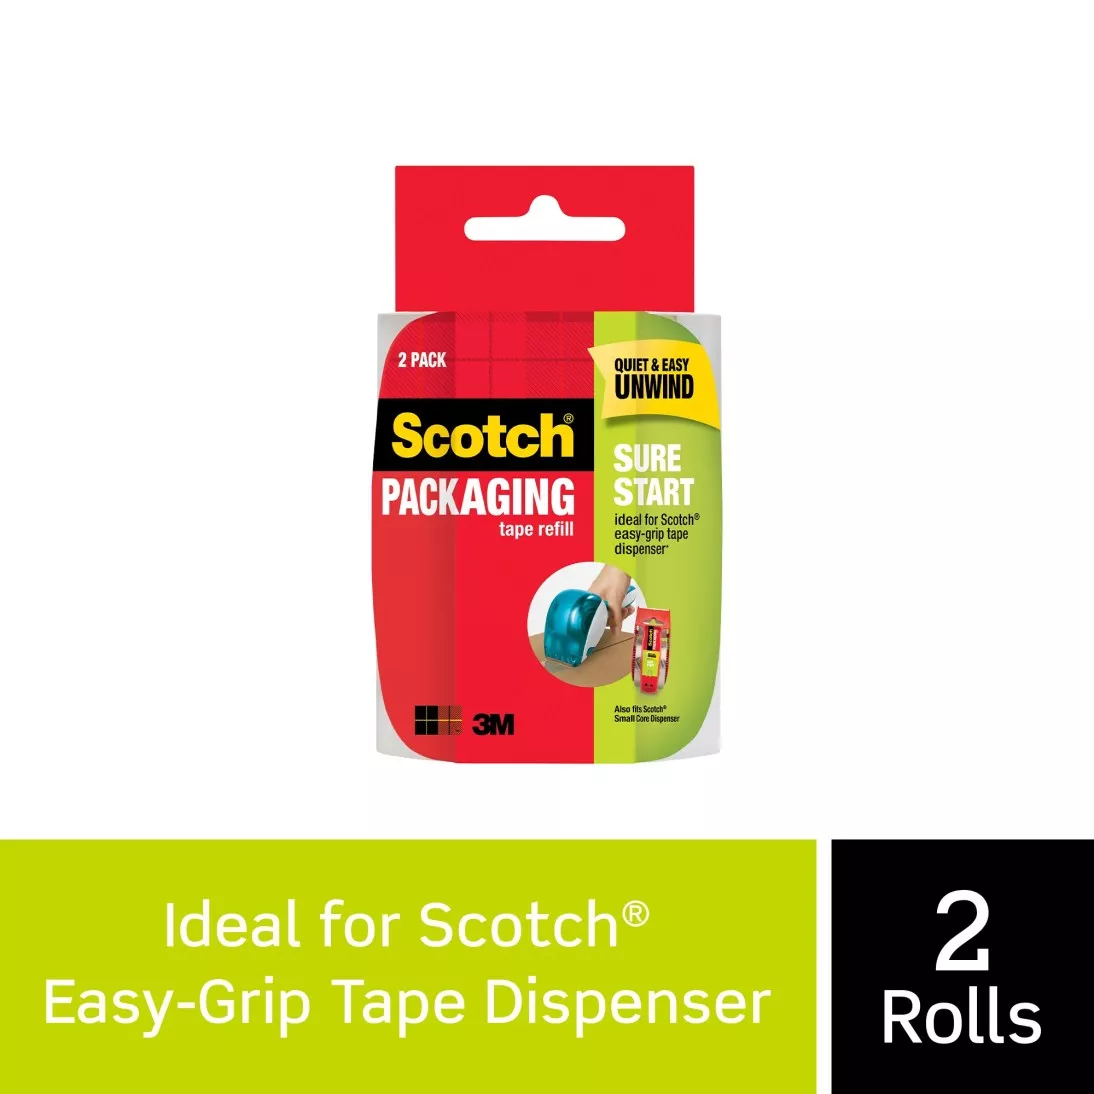 Scotch® Sure Start Shipping Packaging Tape DP-1000-RR-2, 1.88 in x 900
in (48 mm x 22,8 m) 2 Pack